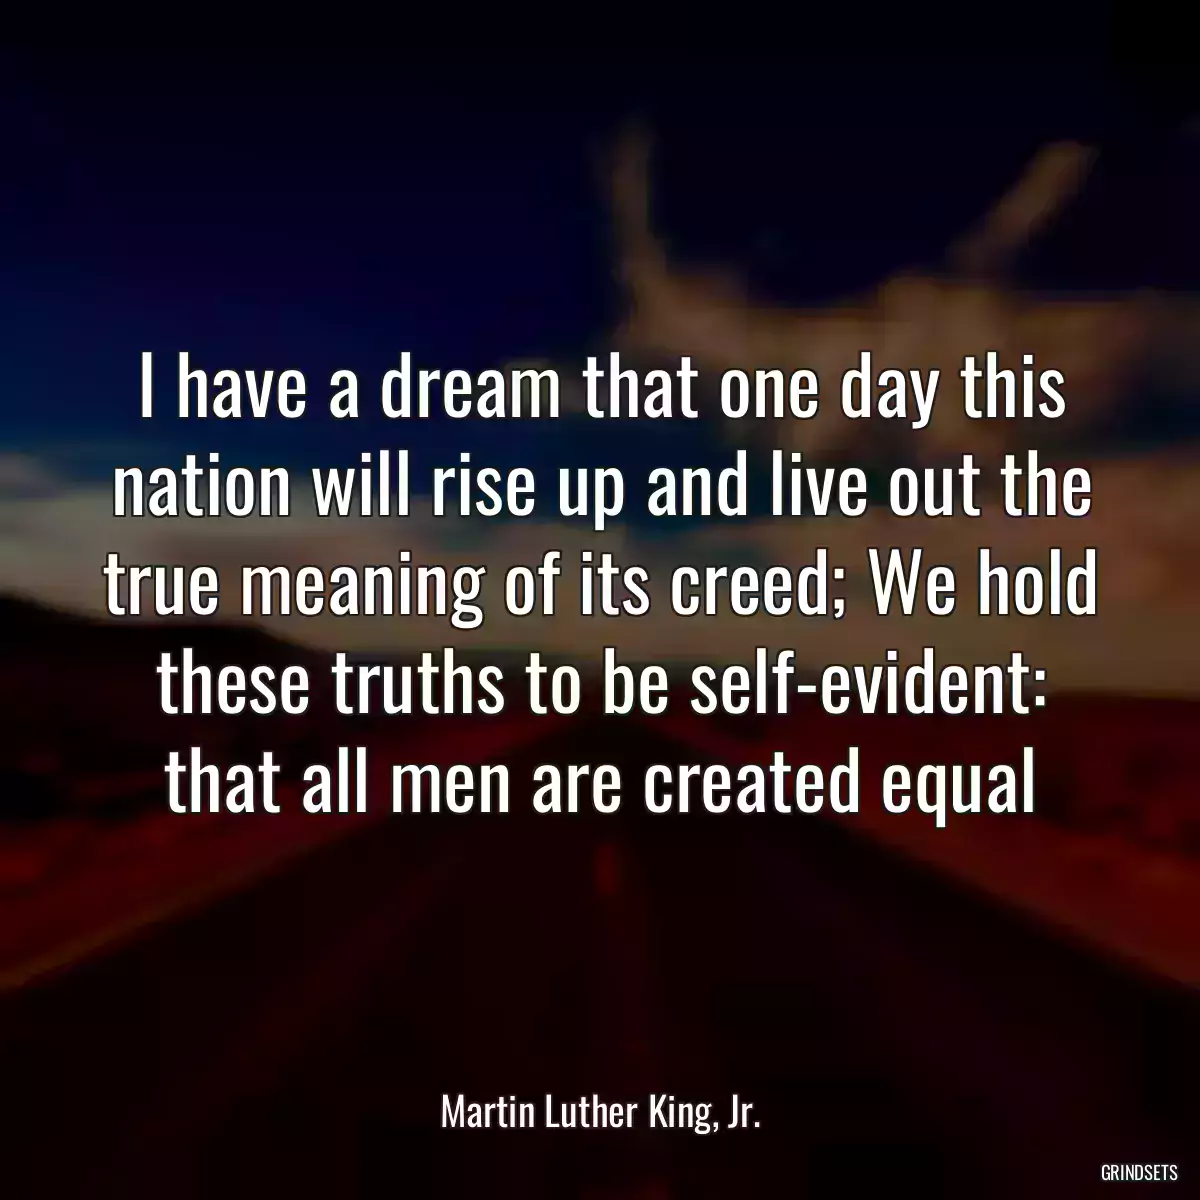 I have a dream that one day this nation will rise up and live out the true meaning of its creed; We hold these truths to be self-evident: that all men are created equal